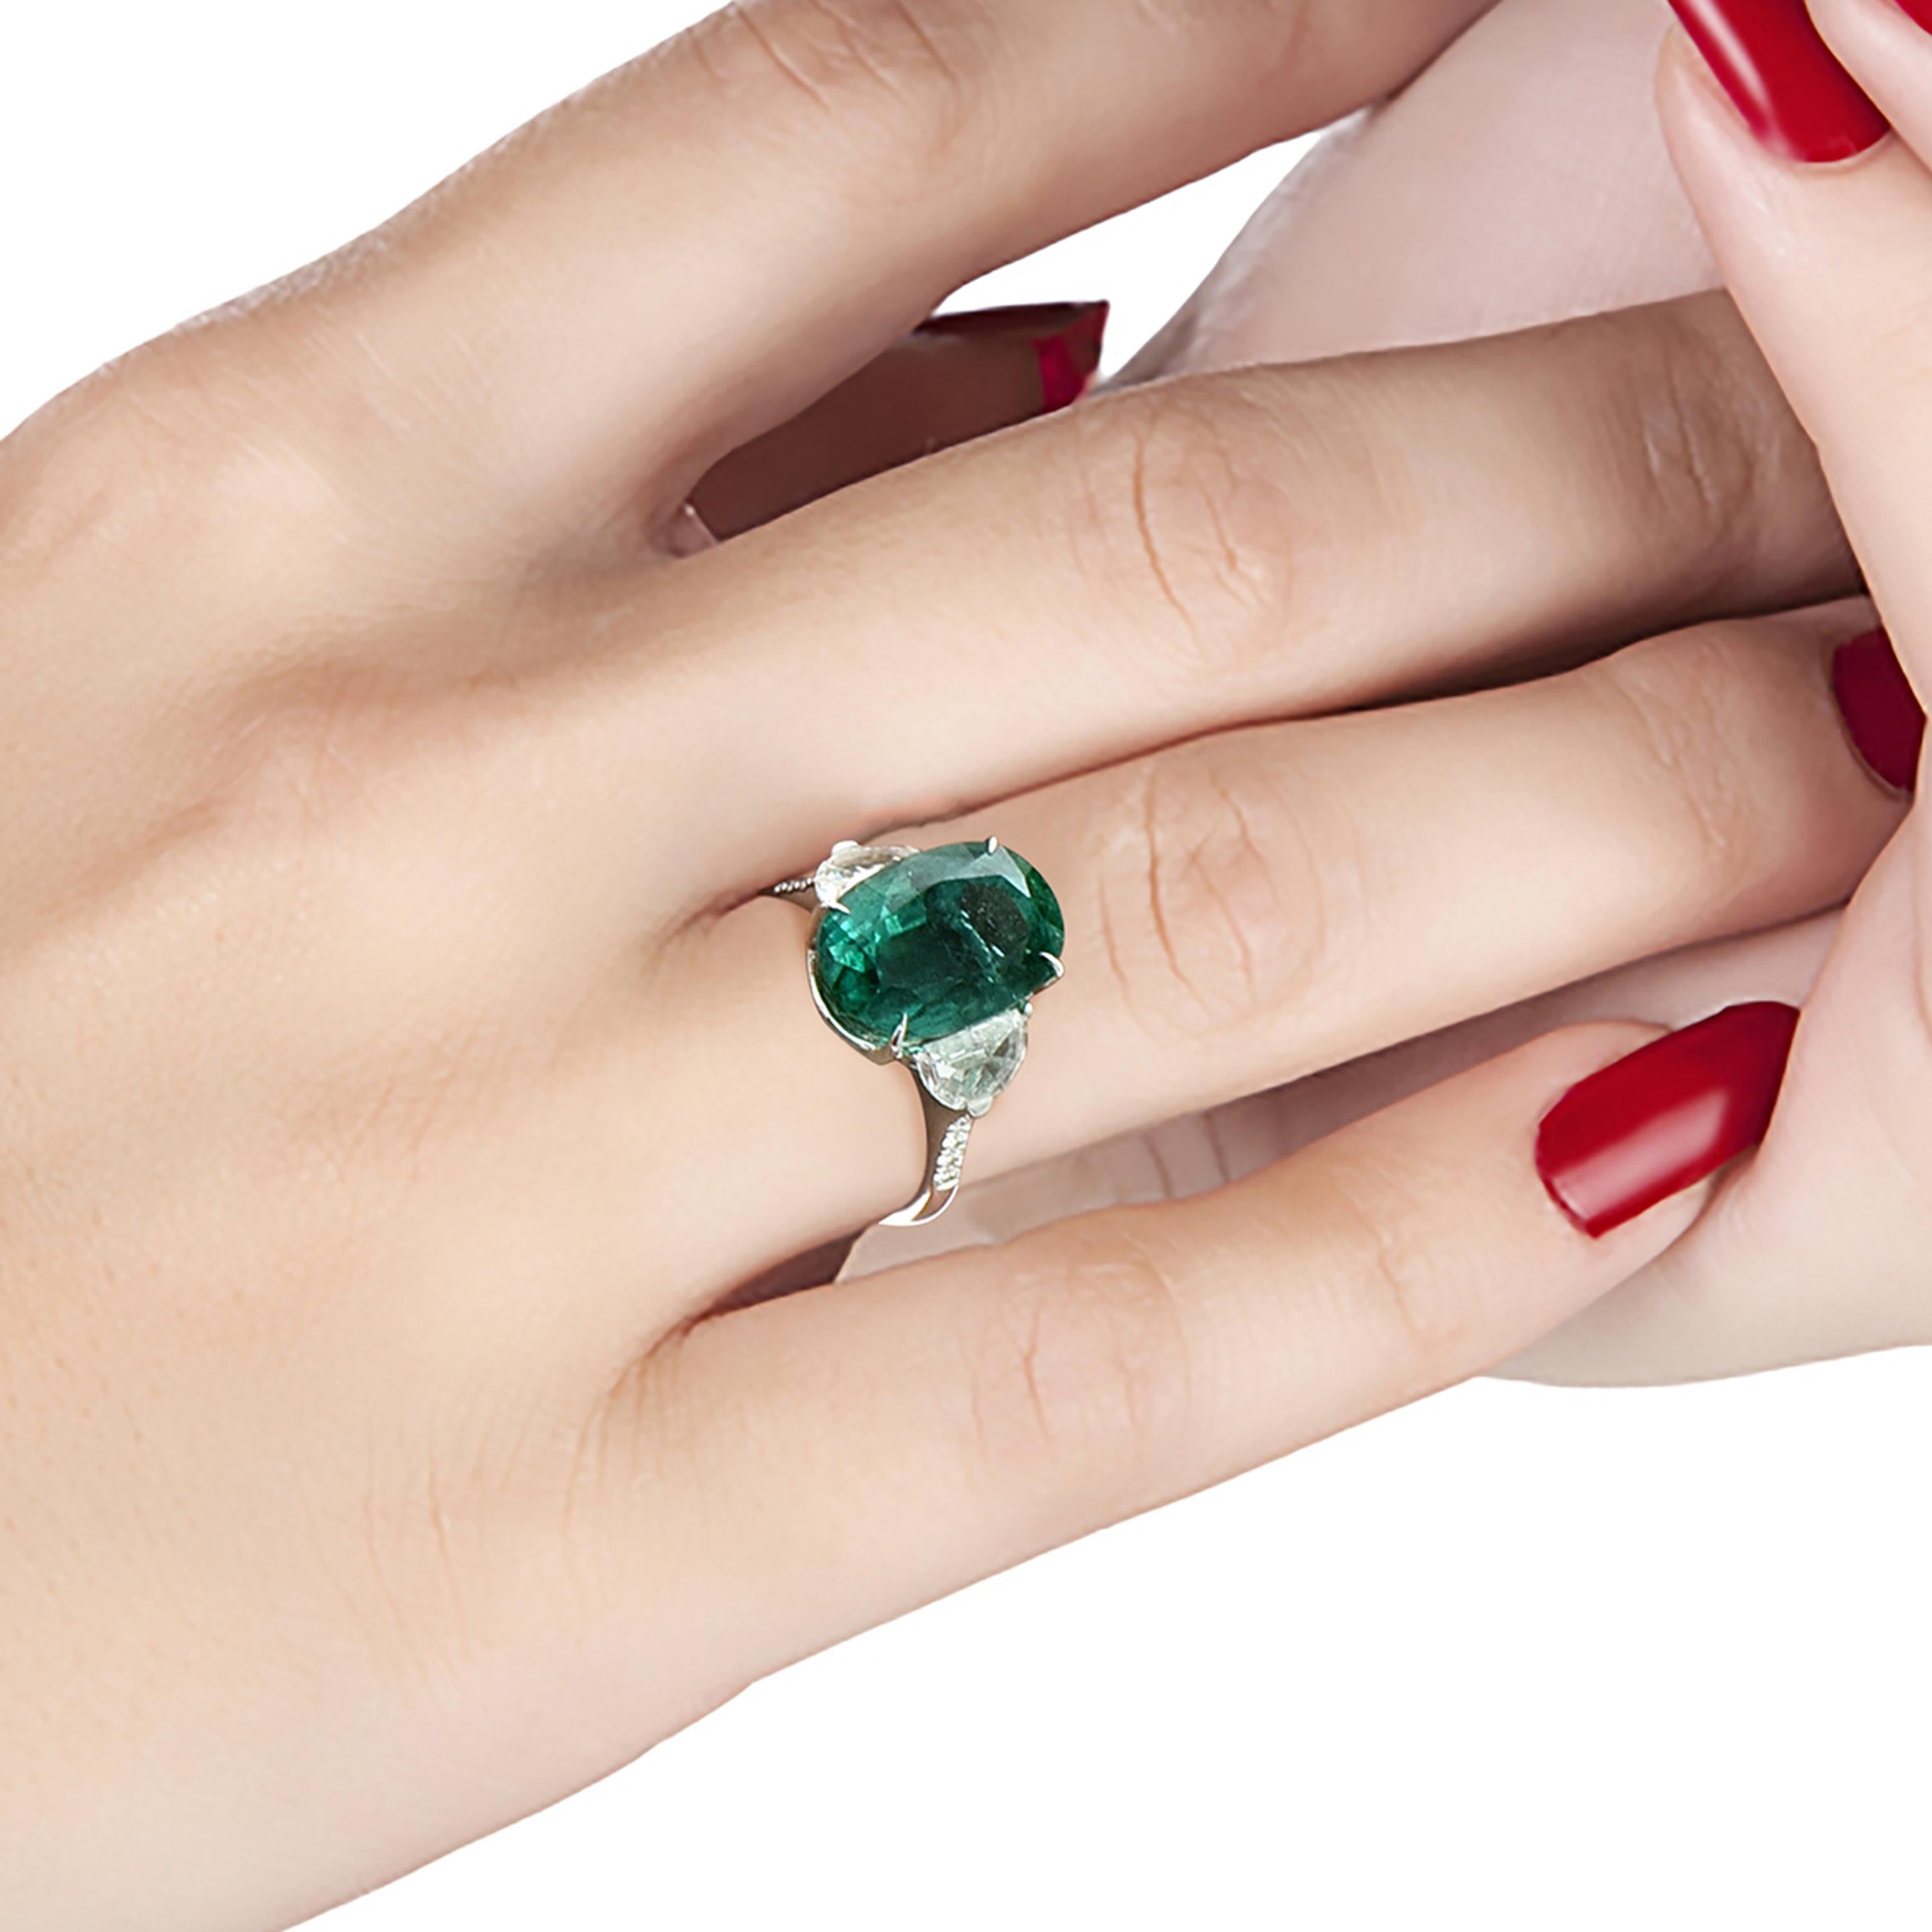 Modern Laviere GIA Certified 7.49 Carat Zambian Emerald and Diamond Ring For Sale